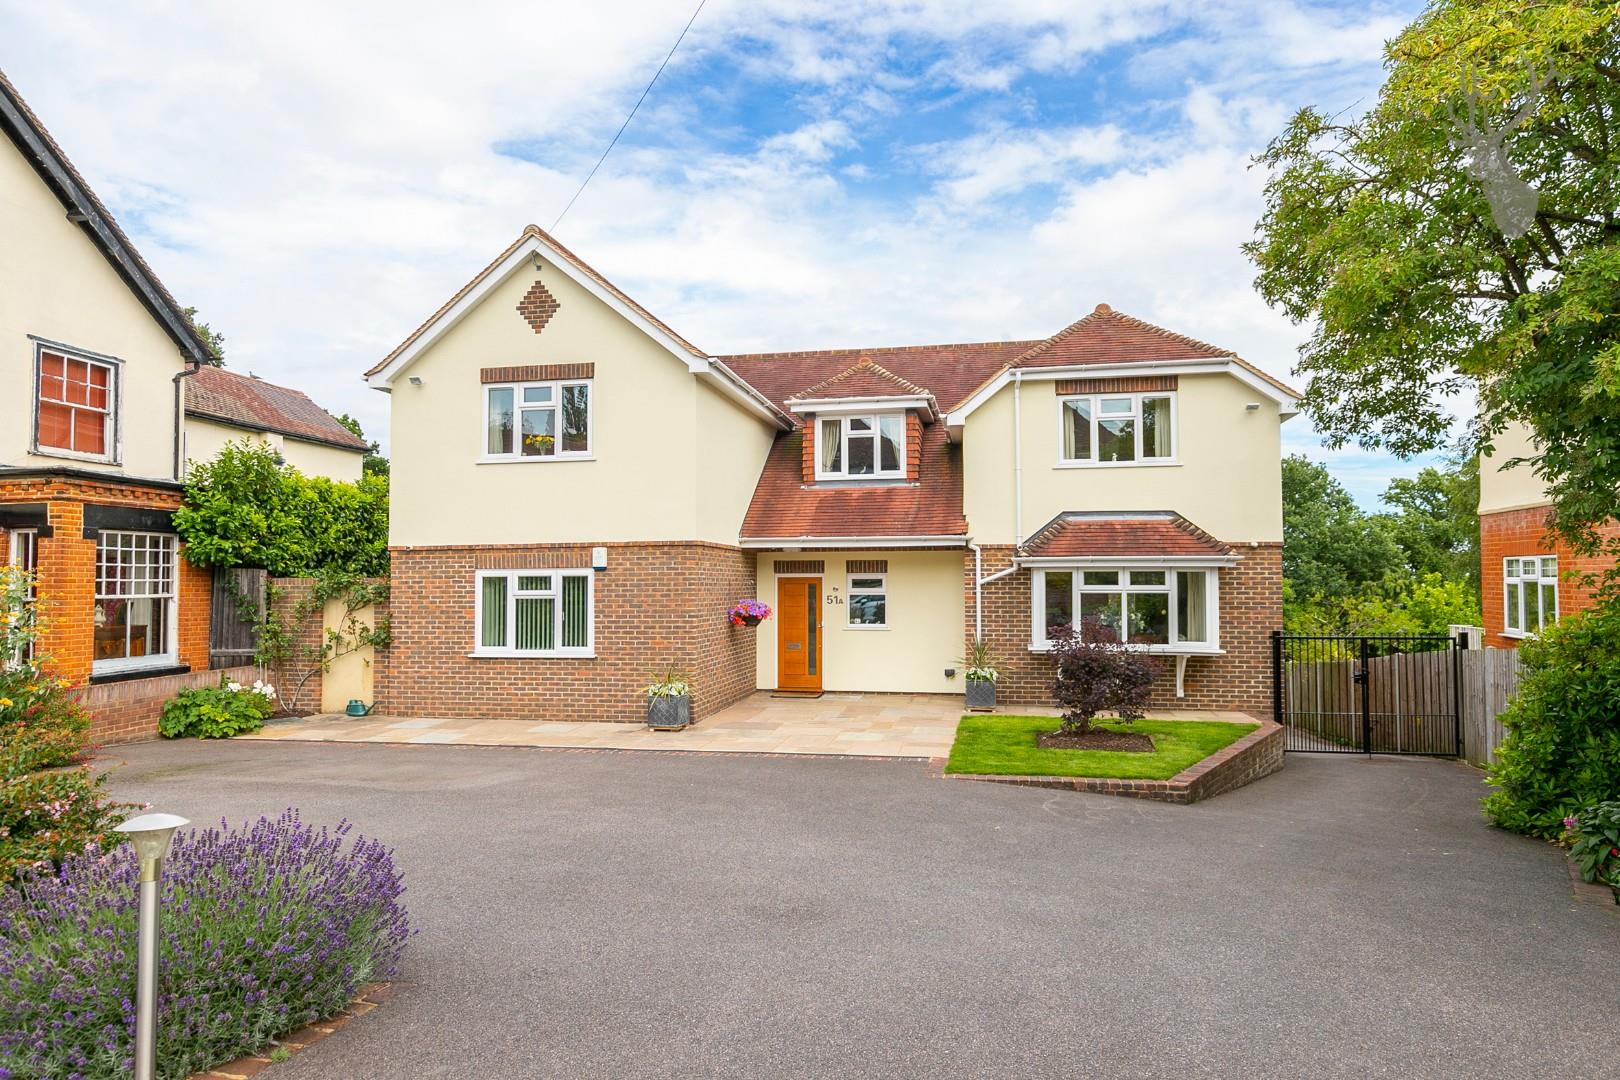 Similar Property: House - Detached in Epping